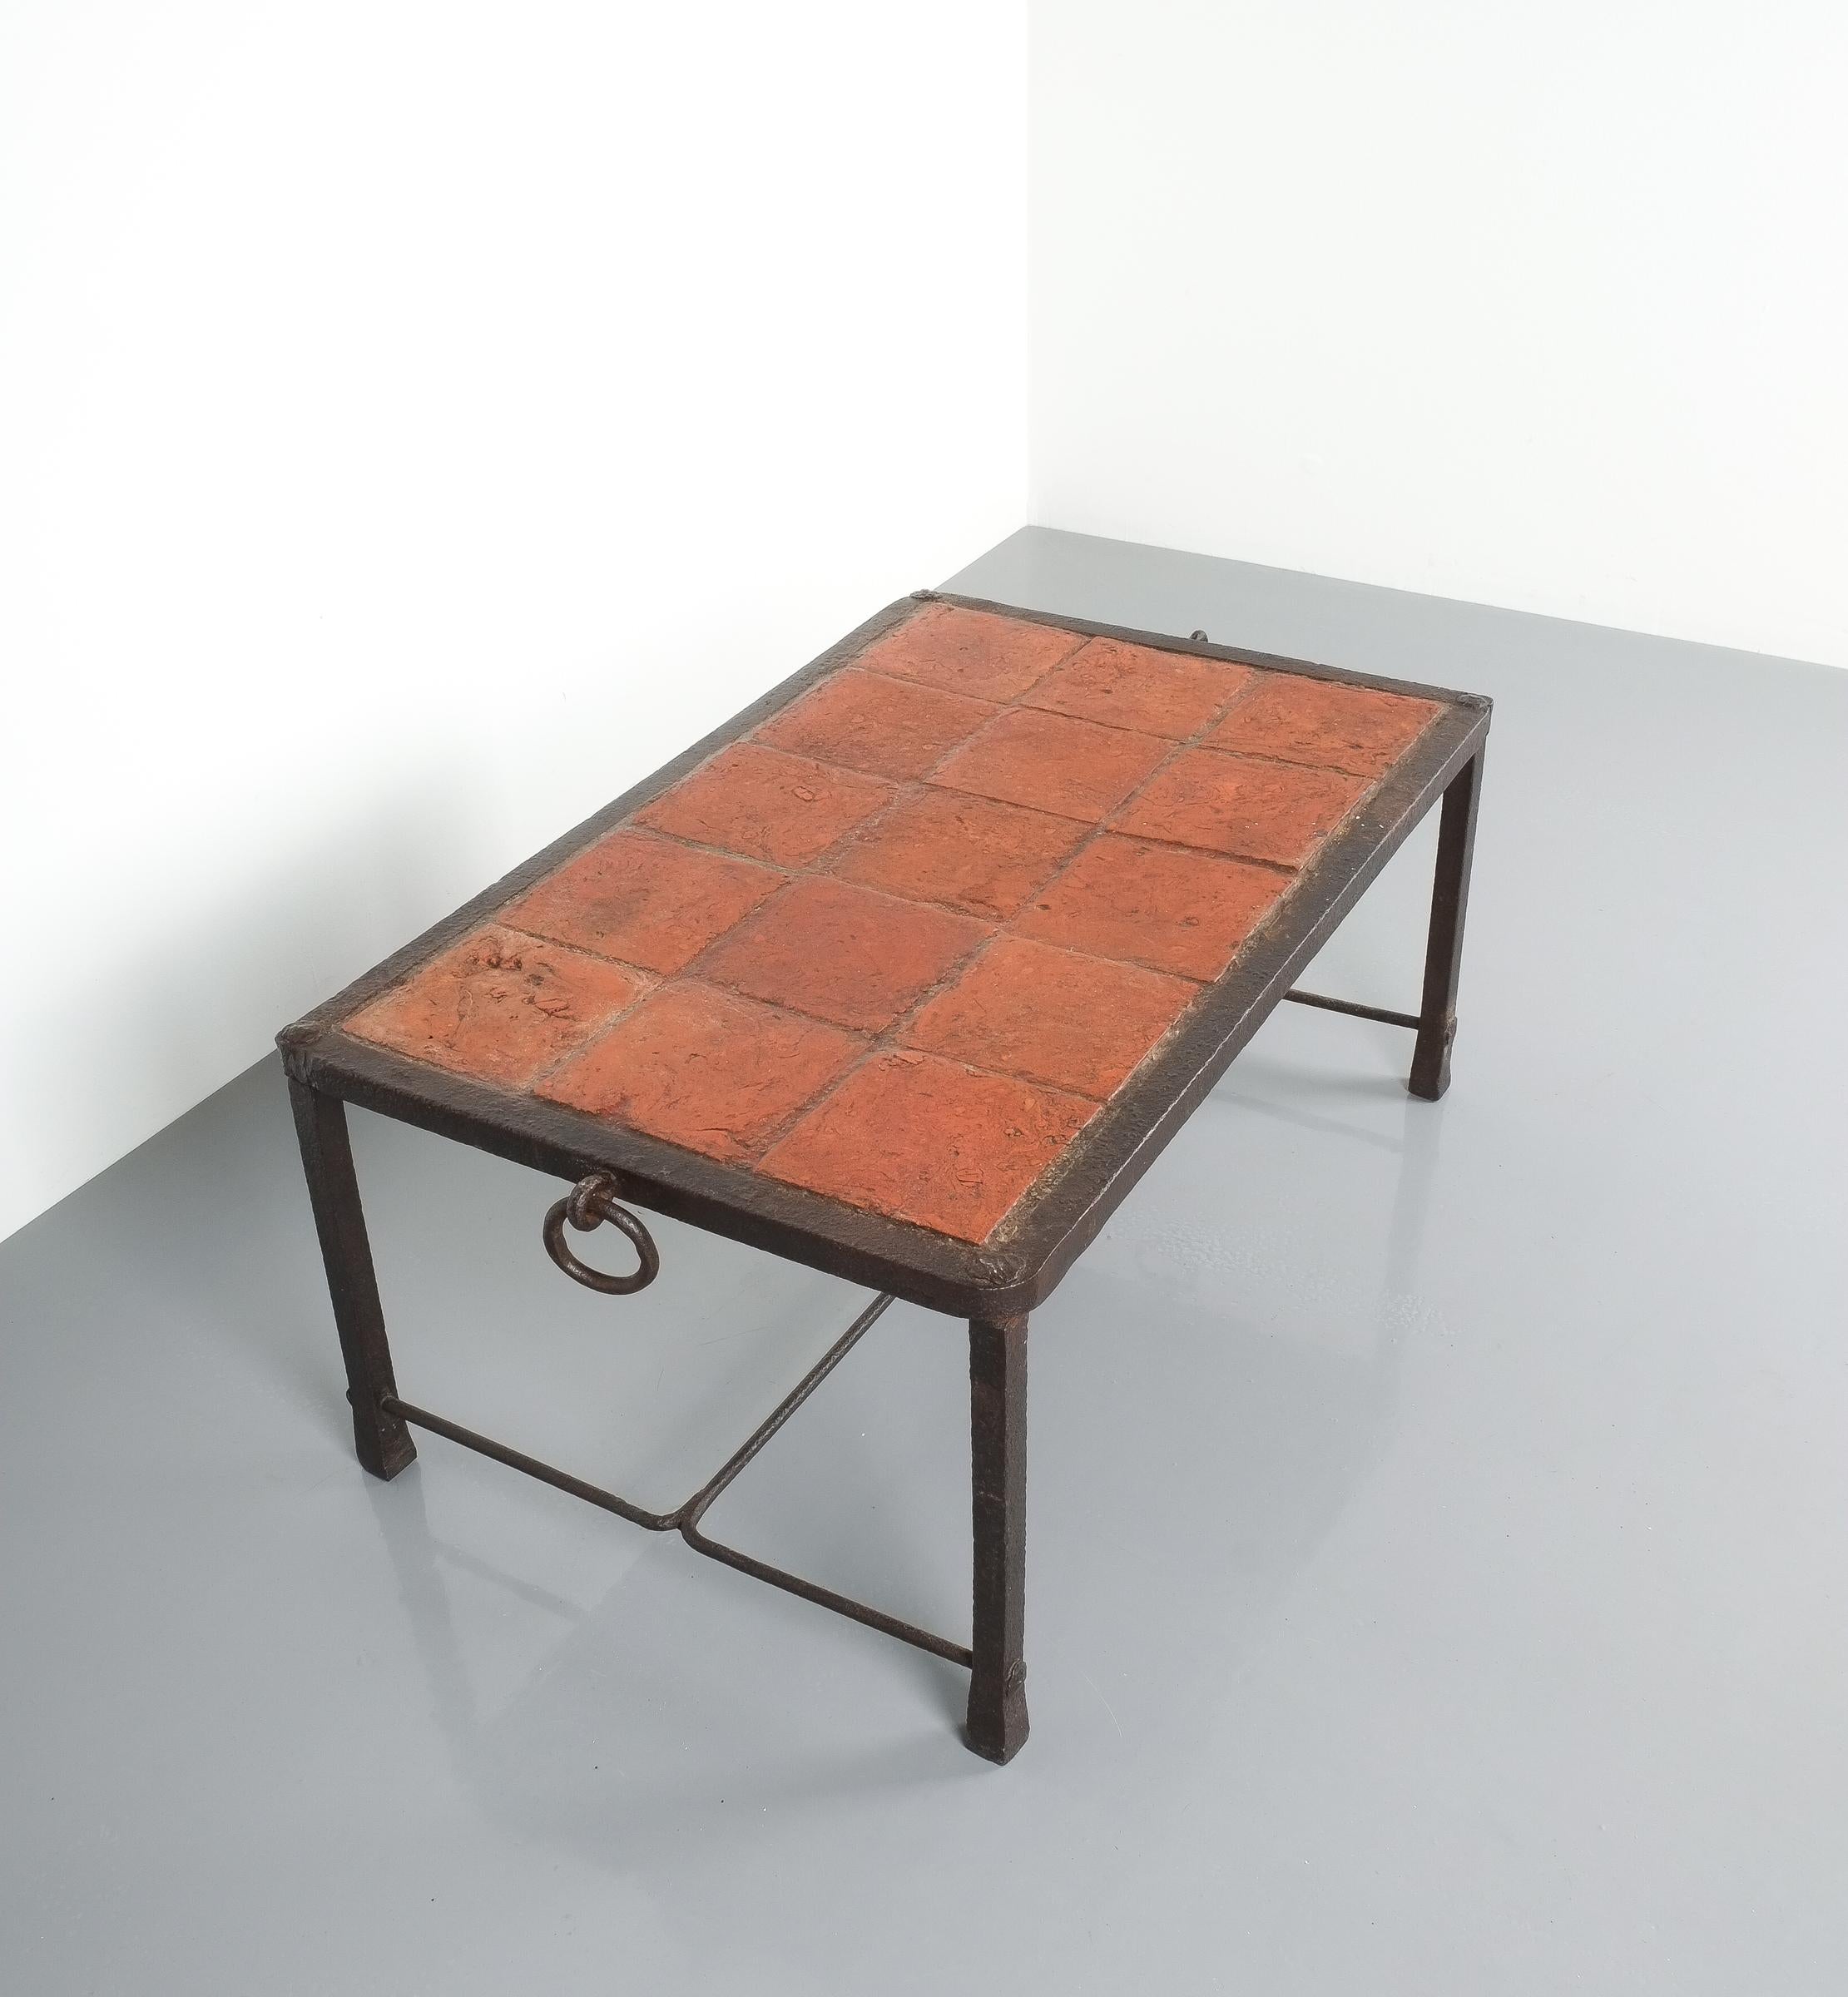 Mid-Century Modern Artisan Wrought Iron Terracotta Coffee Or Outdoor Table, France, 1950